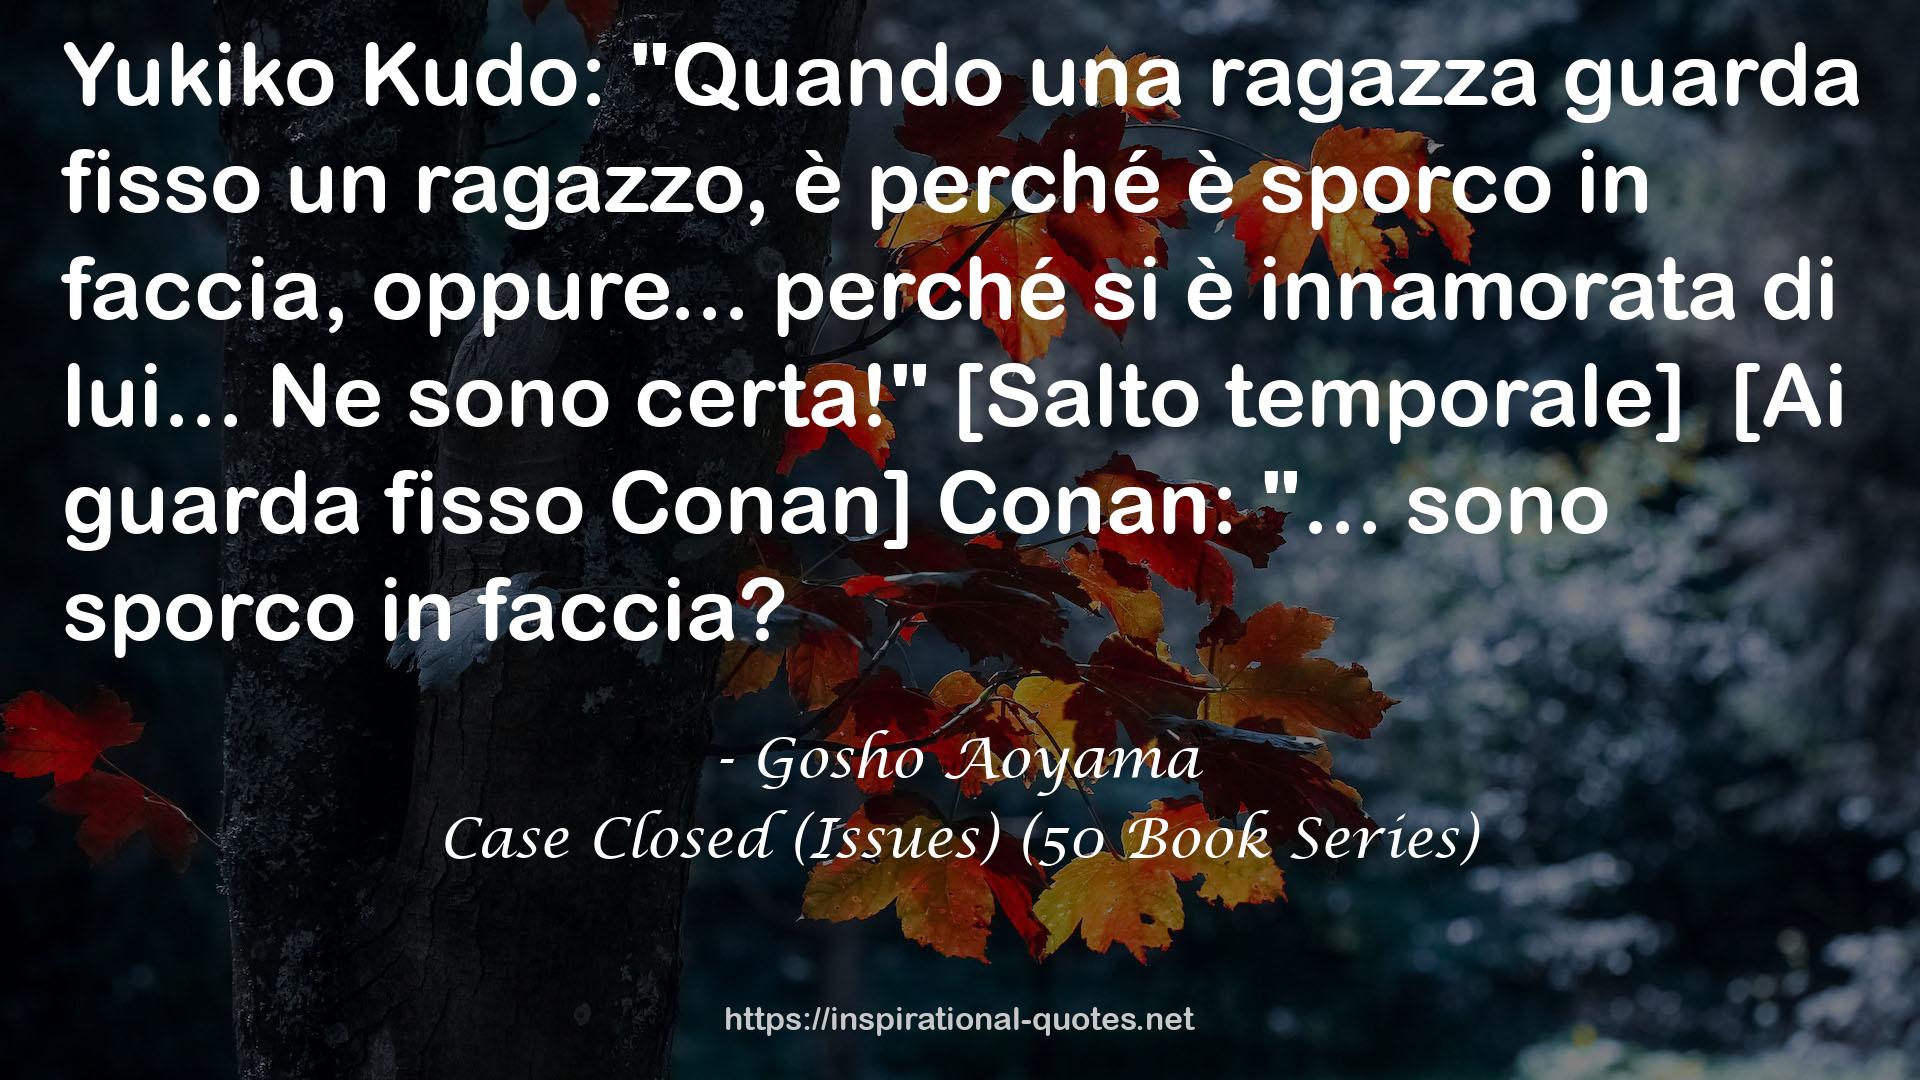 Case Closed (Issues) (50 Book Series) QUOTES